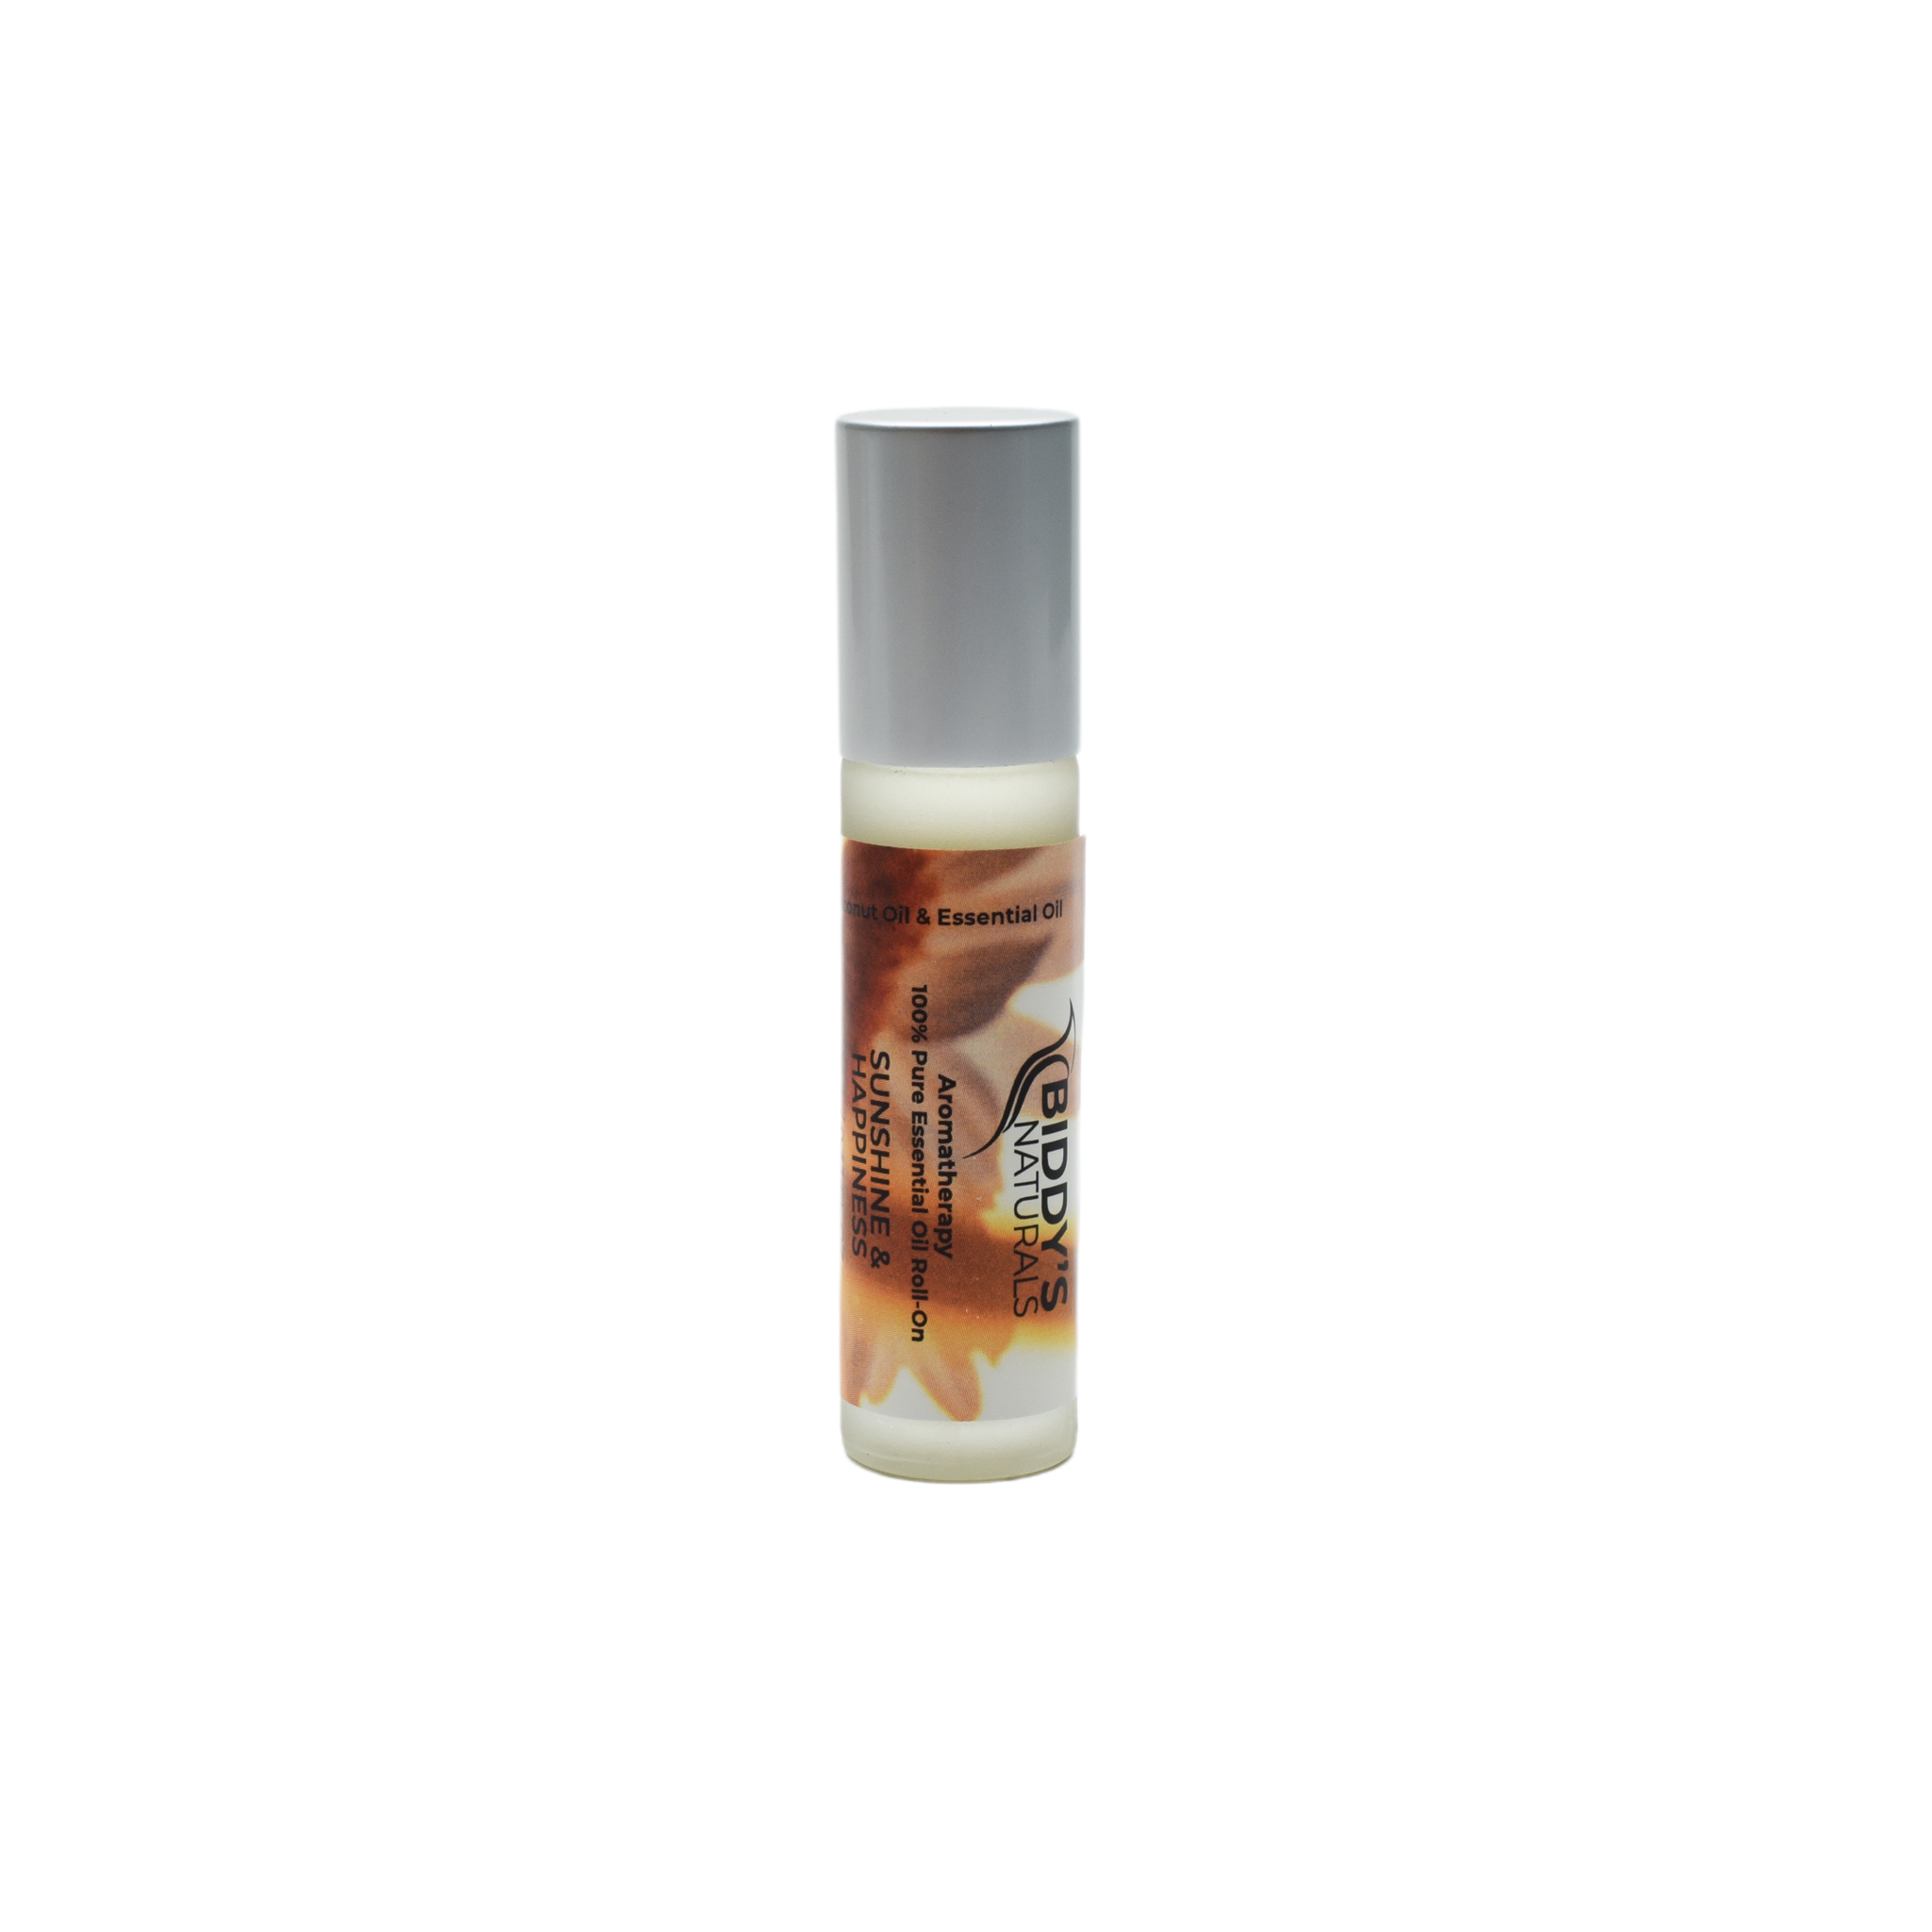 Clementine, Pink Grapefruit, Lemon & Orange SUNSHINE & HAPPINESS Roll On made with 100% Pure Essential Oils